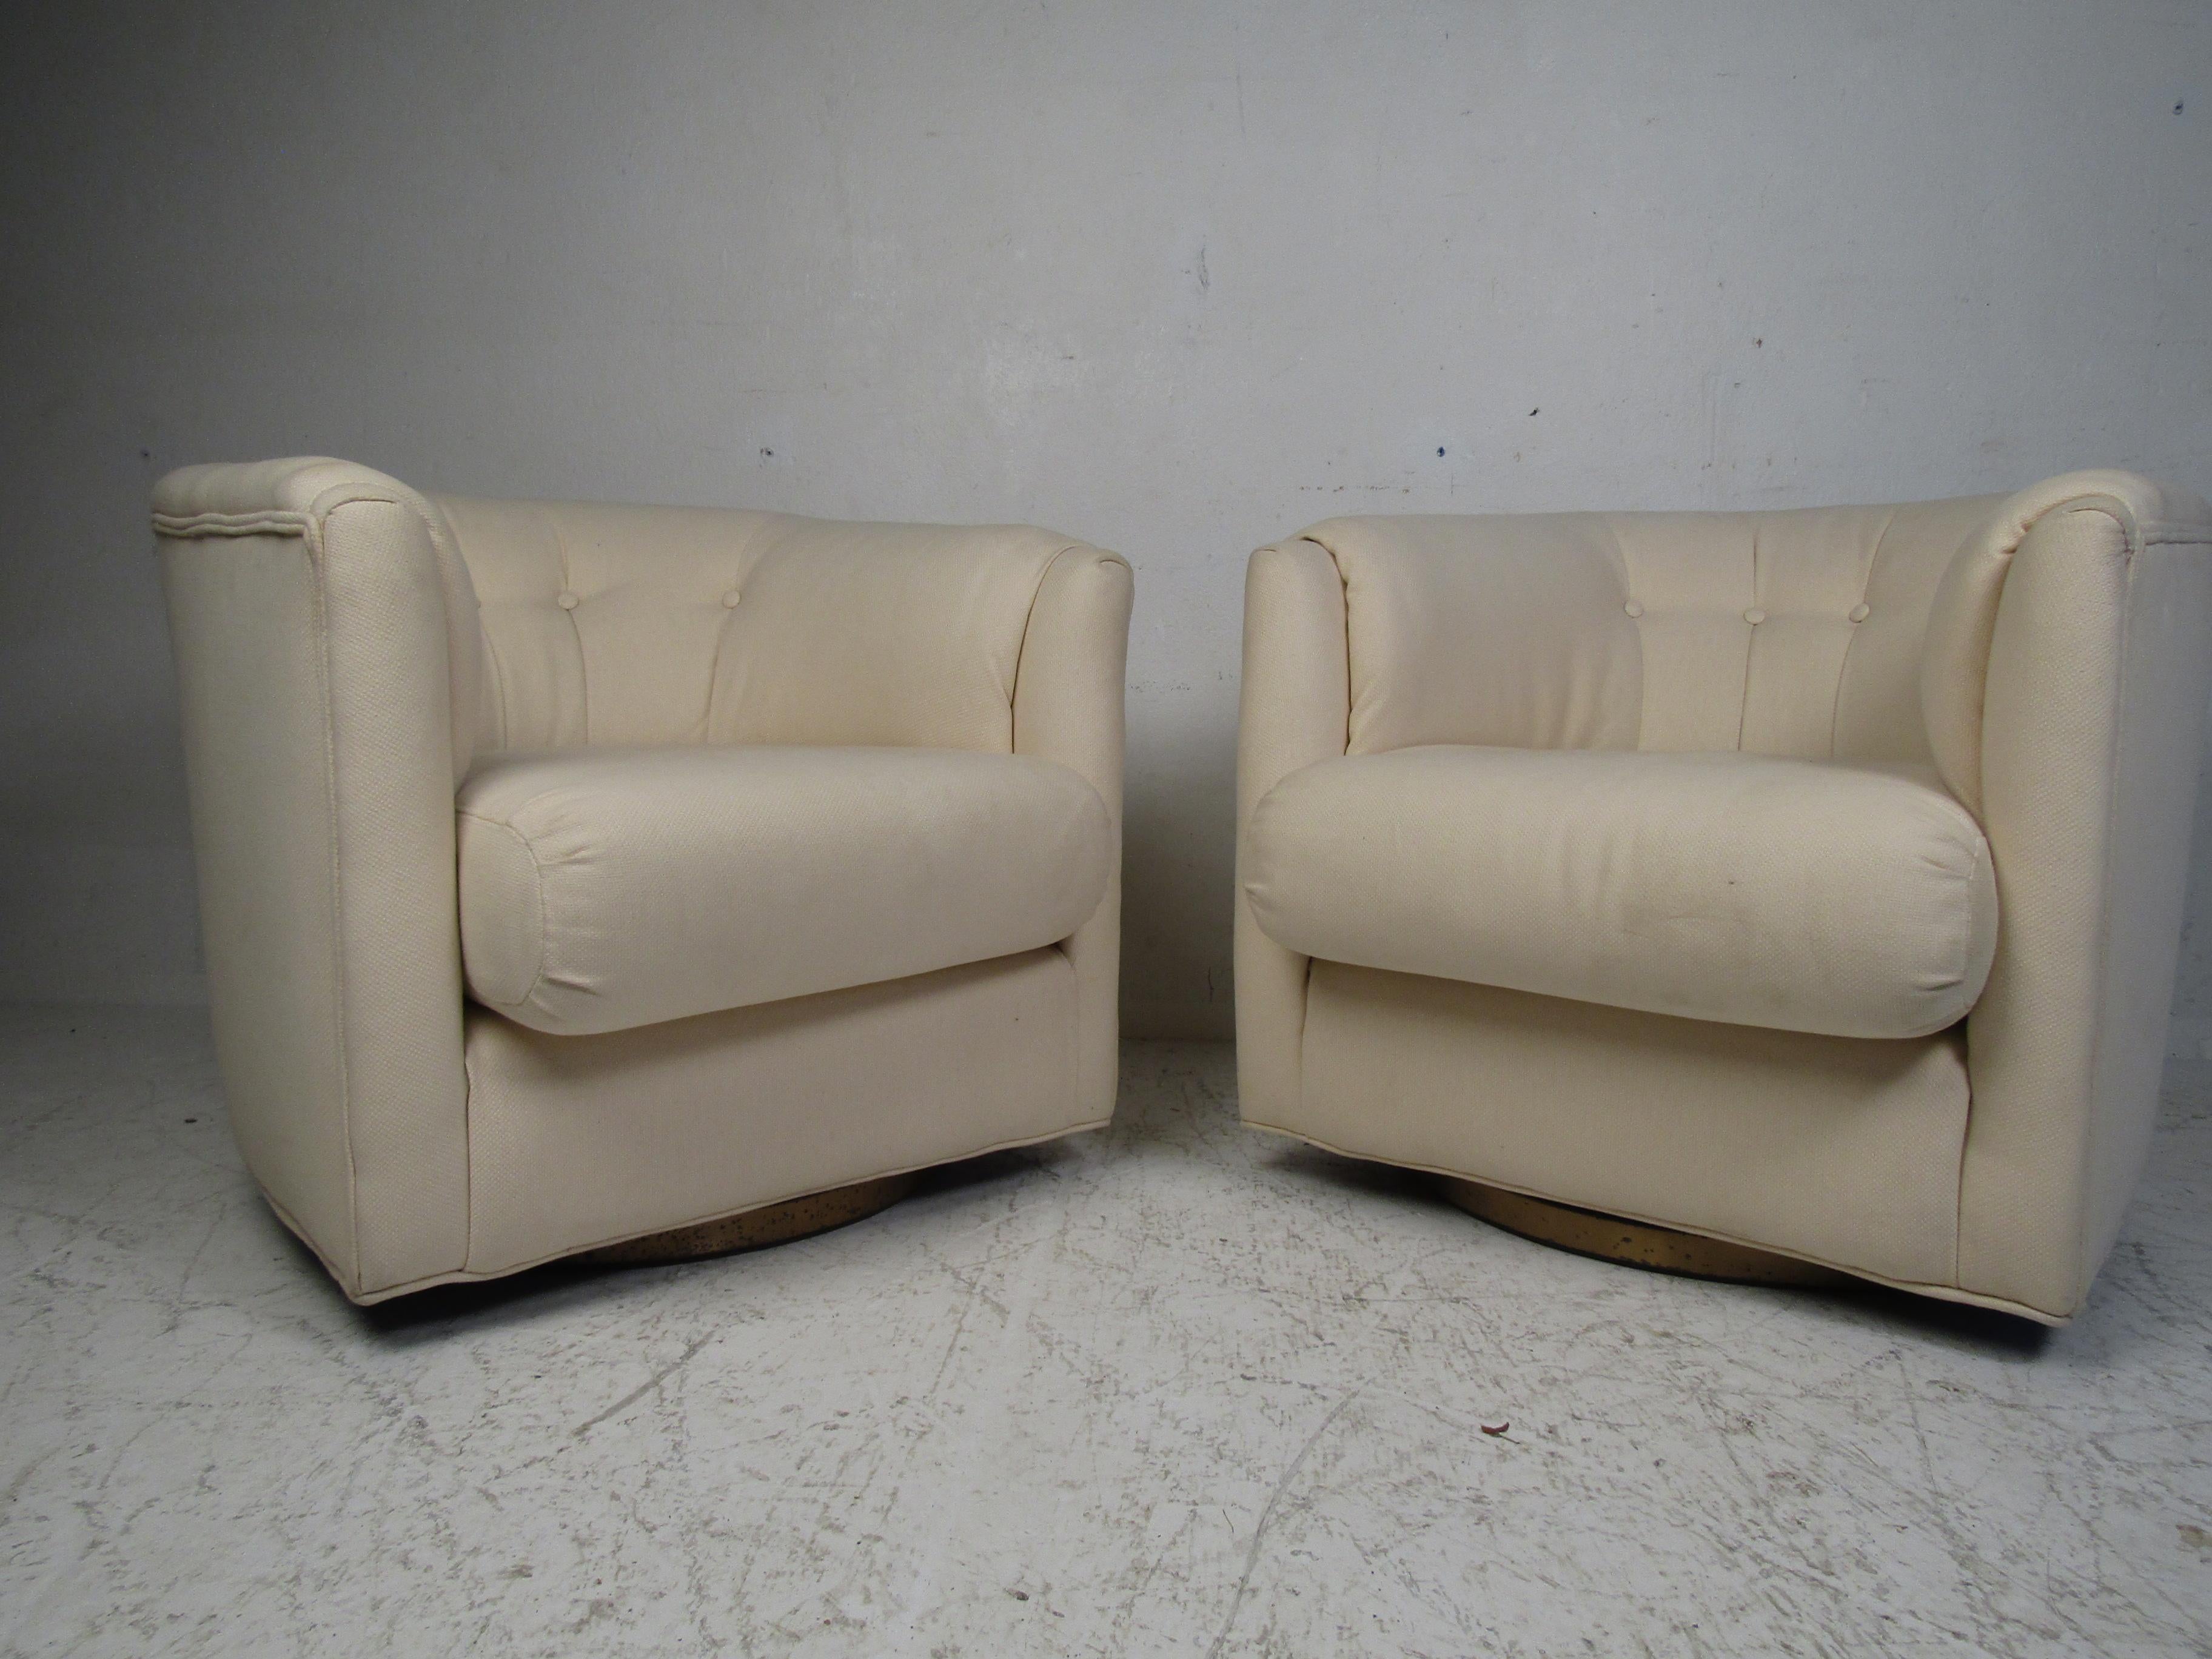 A stylish pair of vintage modern barrel back chairs with a tufted backrest and a thick padded seat. A brass swivel base offers convenience without sacrificing style. This pair of lounge chairs make the perfect addition to any home, business, or